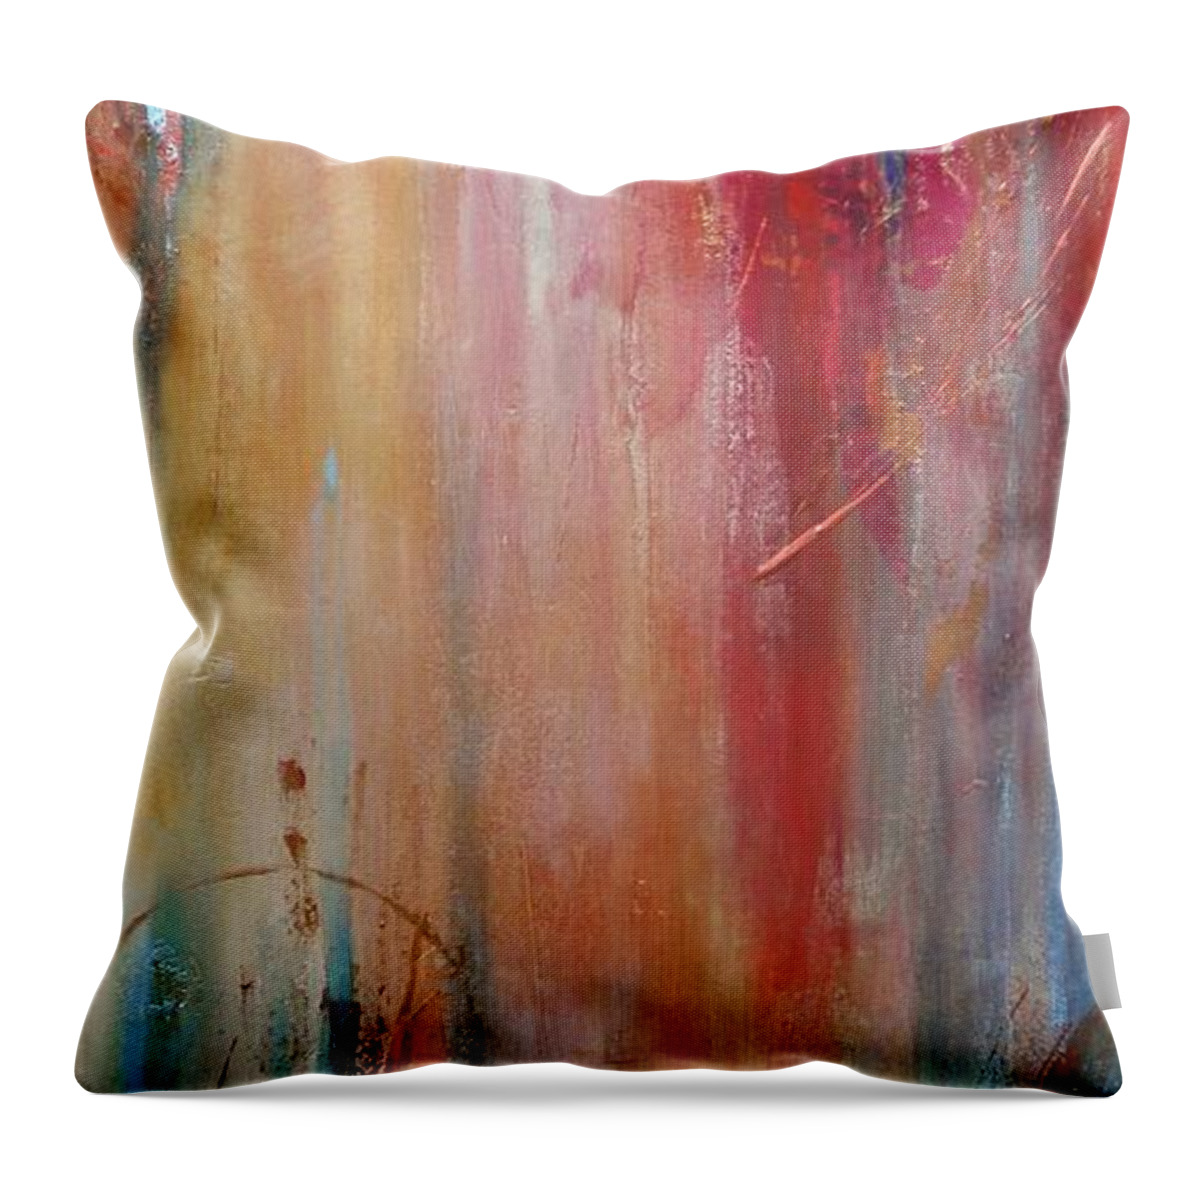 Lifted Spirits Throw Pillow featuring the painting Lifted Spirits by Debi Starr